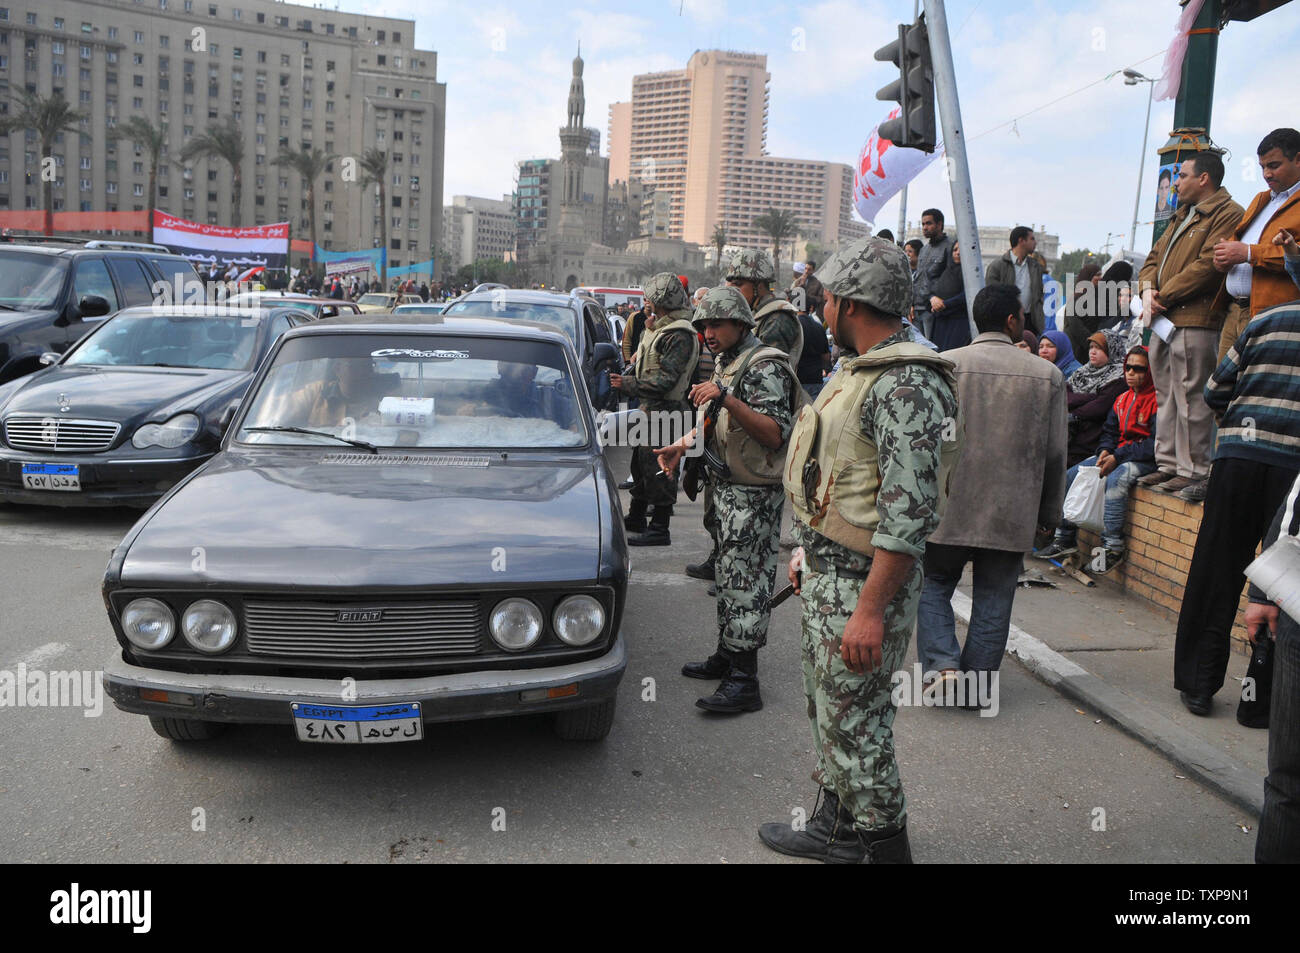 Egyptian soldiers keep traffic moving in Egypt's Tahrir Square, as most protester have packed up and gone home following the 18-day stand off which led to the resignation of President Hosni Mubarak following his 30 year rule, February 13, 2011. UPI Stock Photo